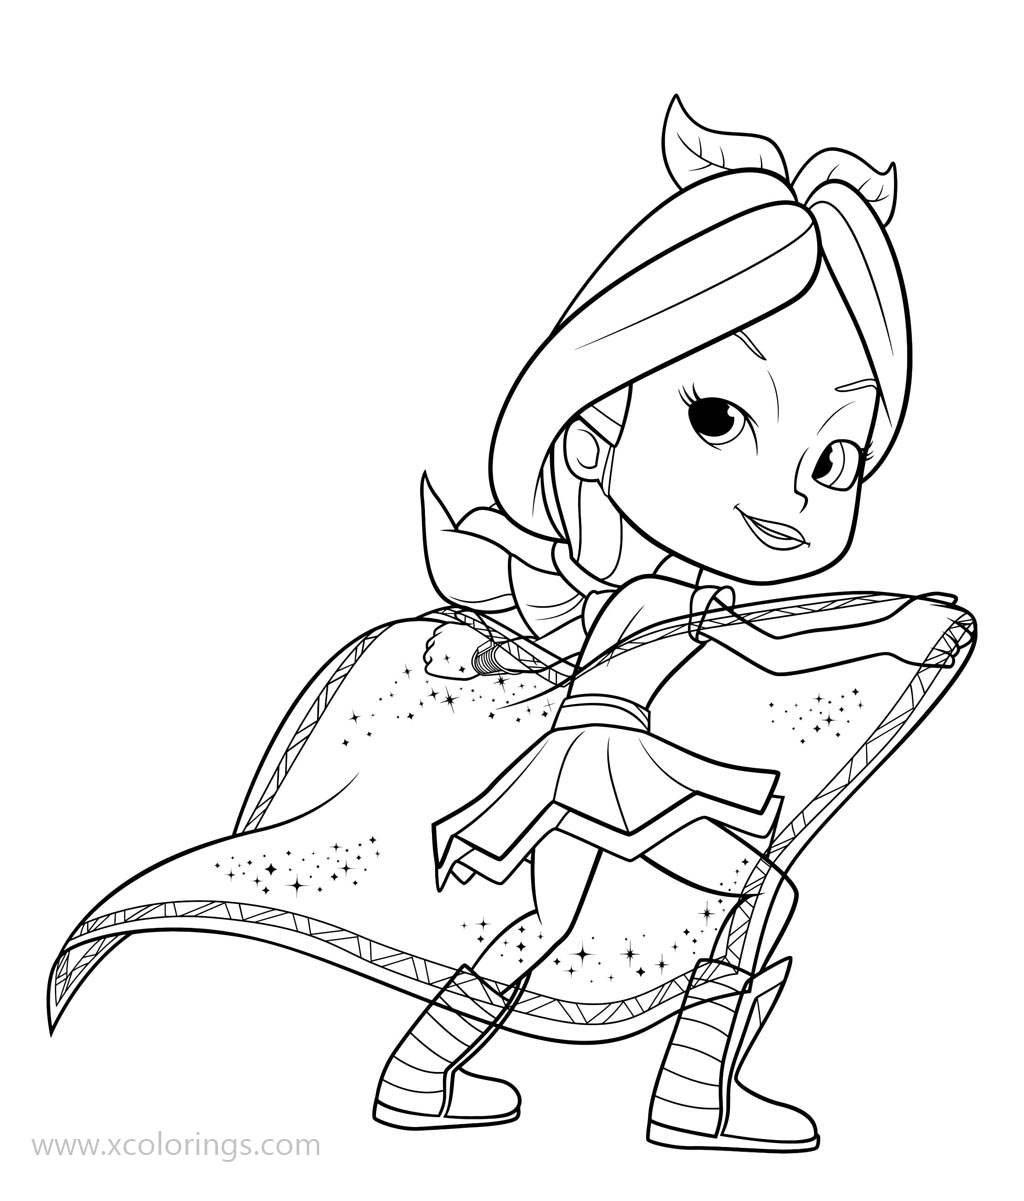 Free Pepper Mintz from Rainbow Rangers Coloring Pages printable